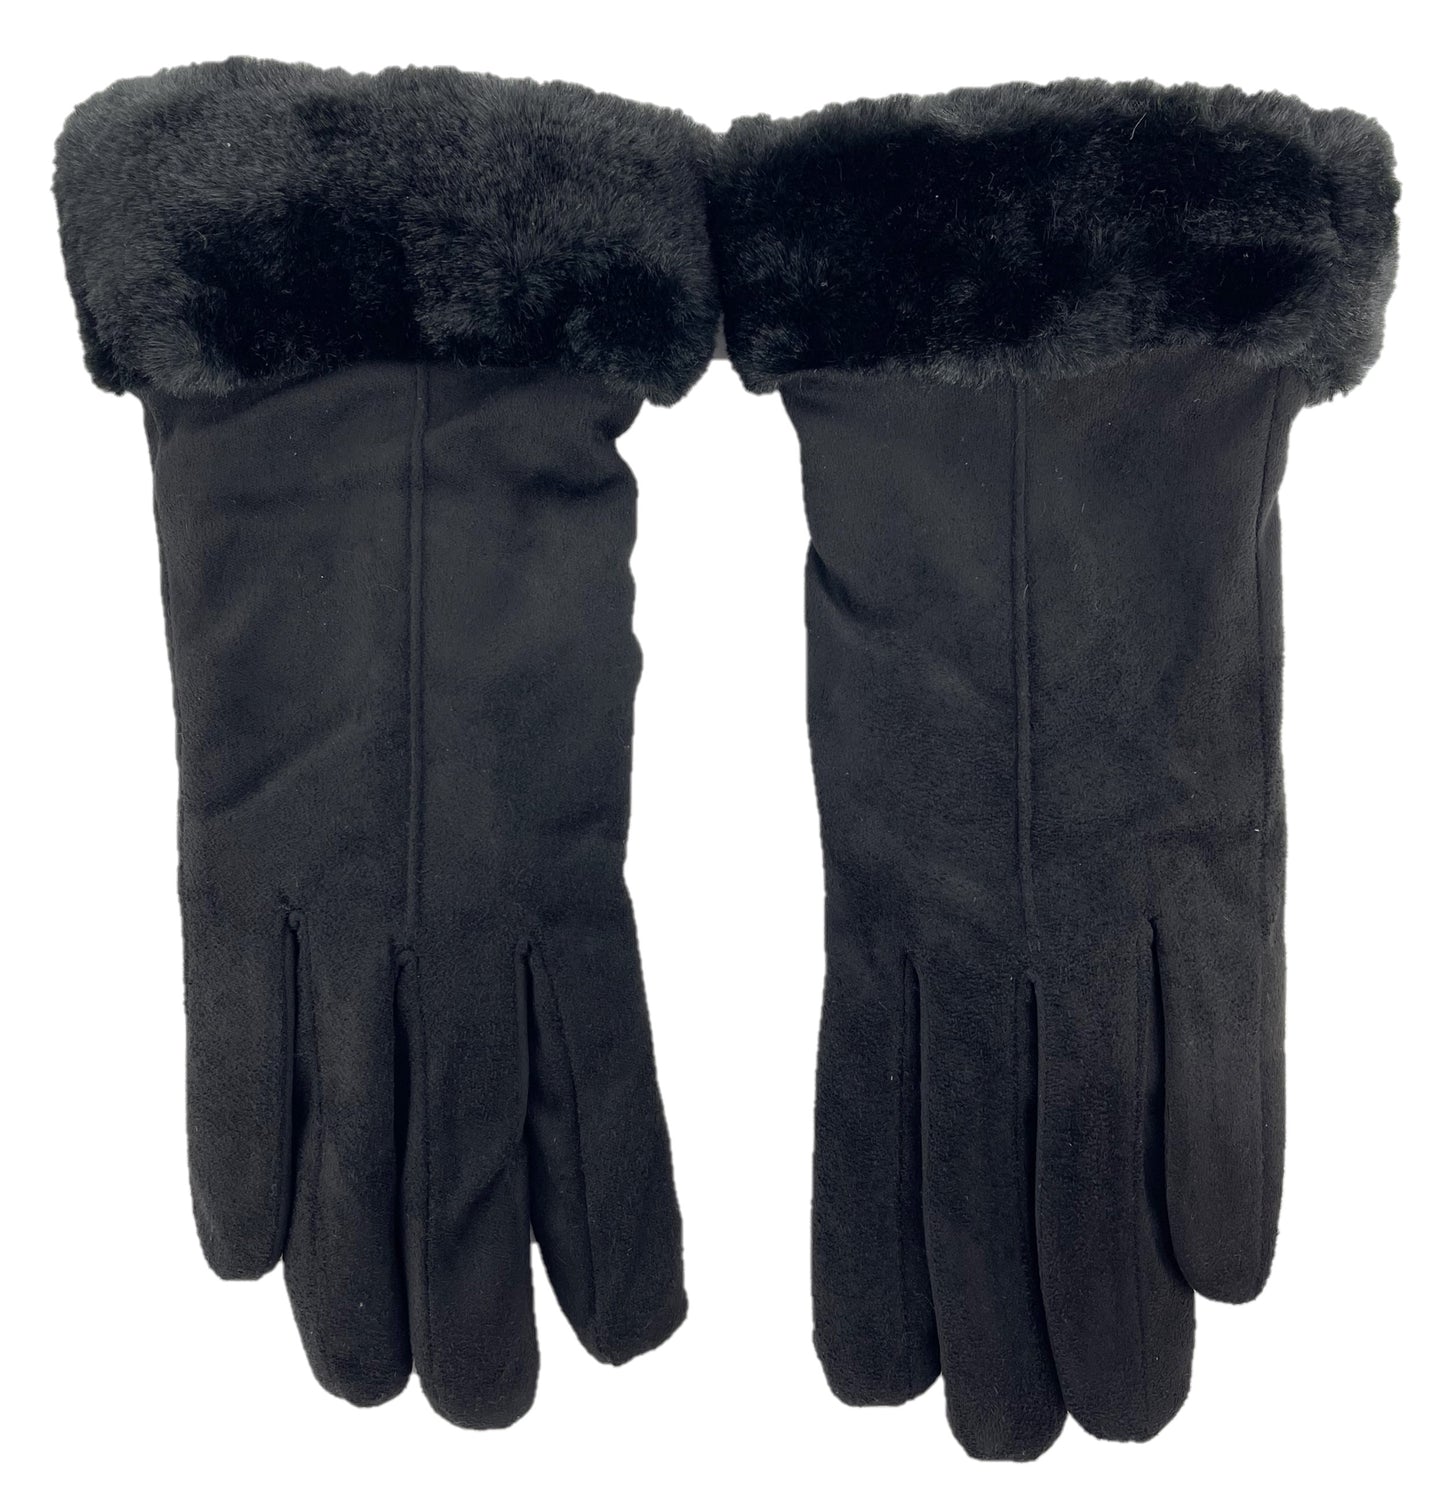 Ladies Supersoft Faux Fur Trimmed Sherpa Lined Suedette Gloves